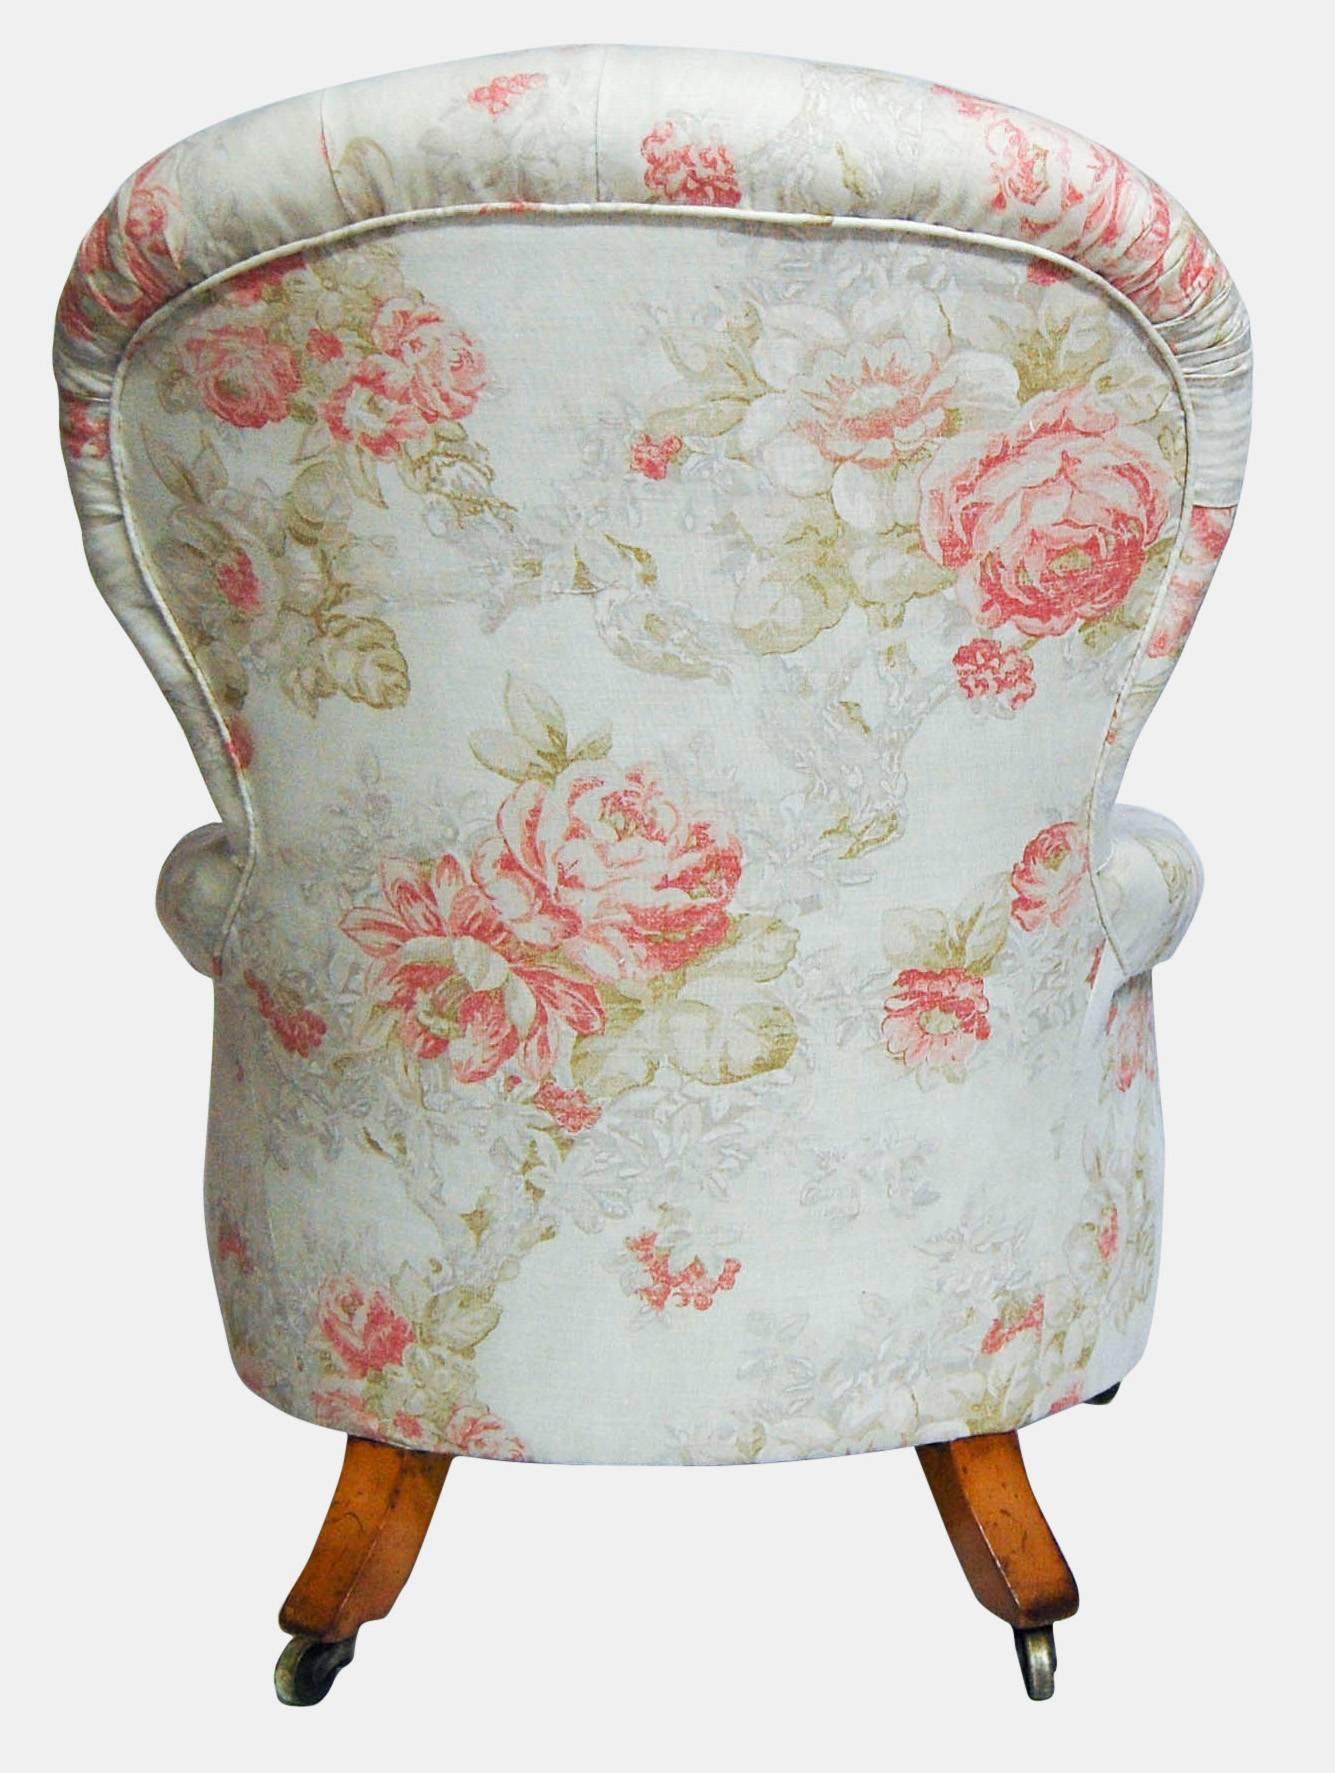 William IV Upholstered Spoon Back Armchair 1